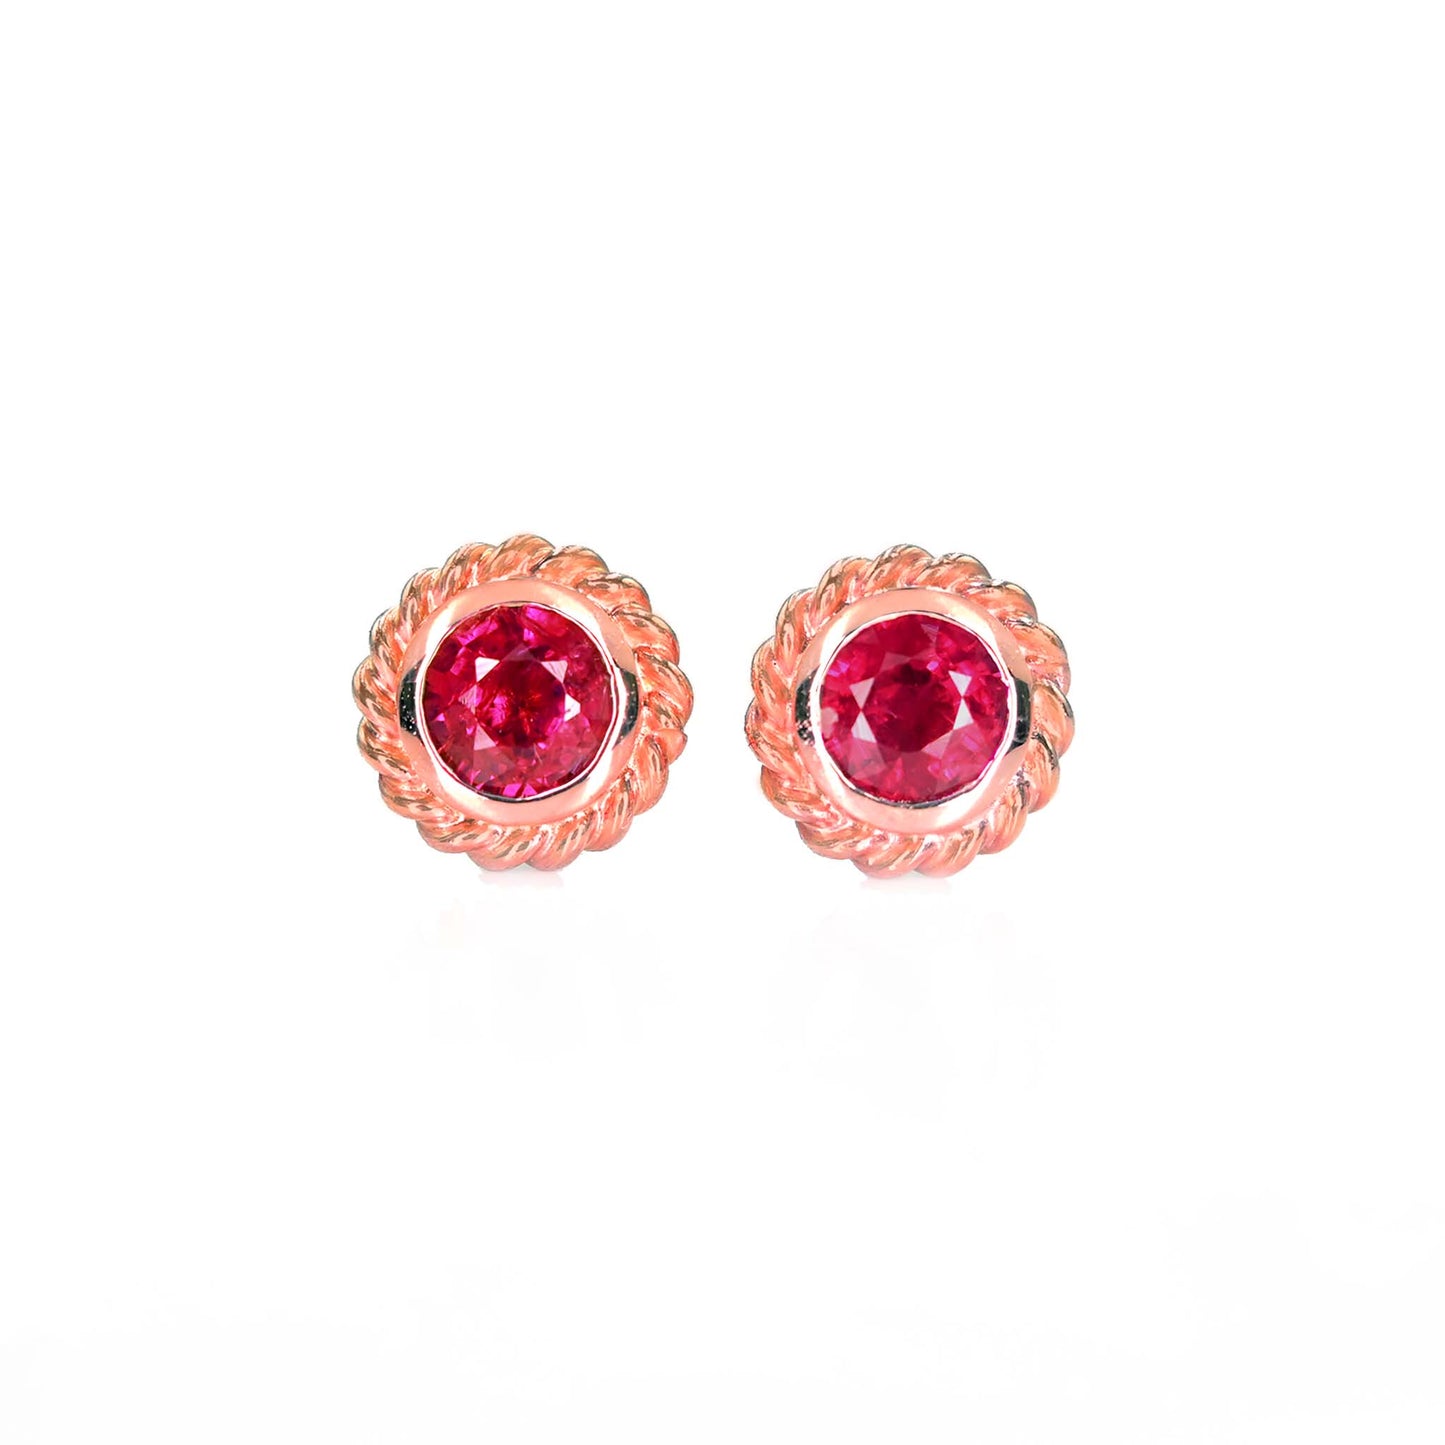 The Rubirope handmade earrings in 14k rosegold from Chiang Mai